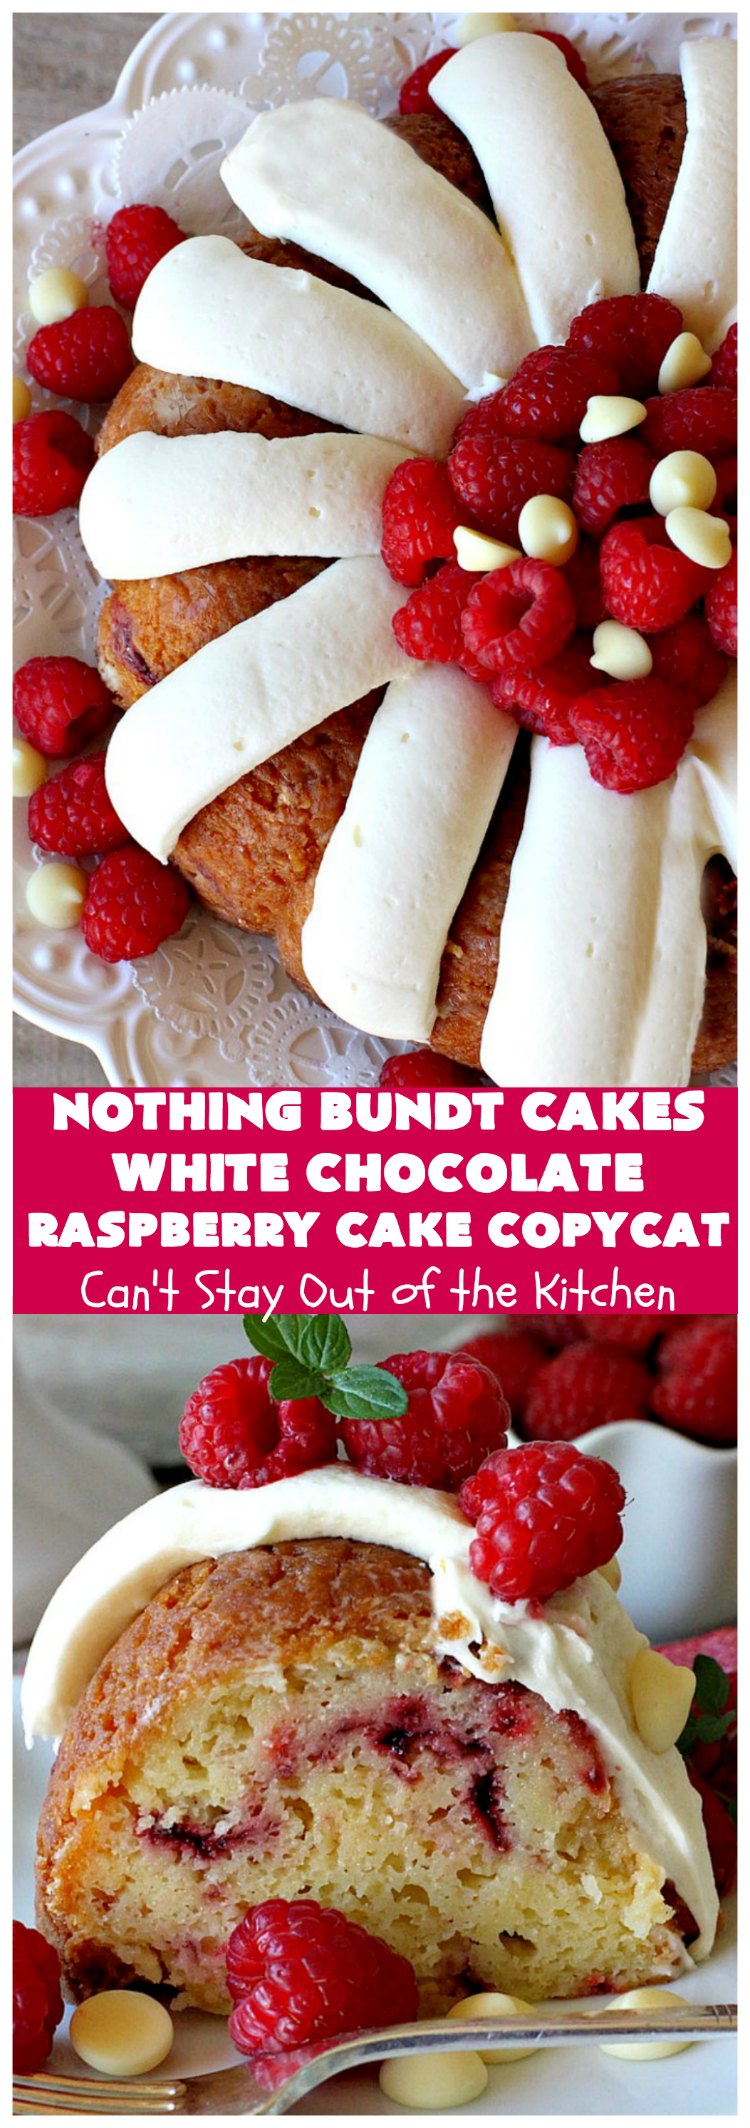 Nothing Bundt Cakes White Chocolate Raspberry Cake Copycat | Can't Stay Out of the Kitchen